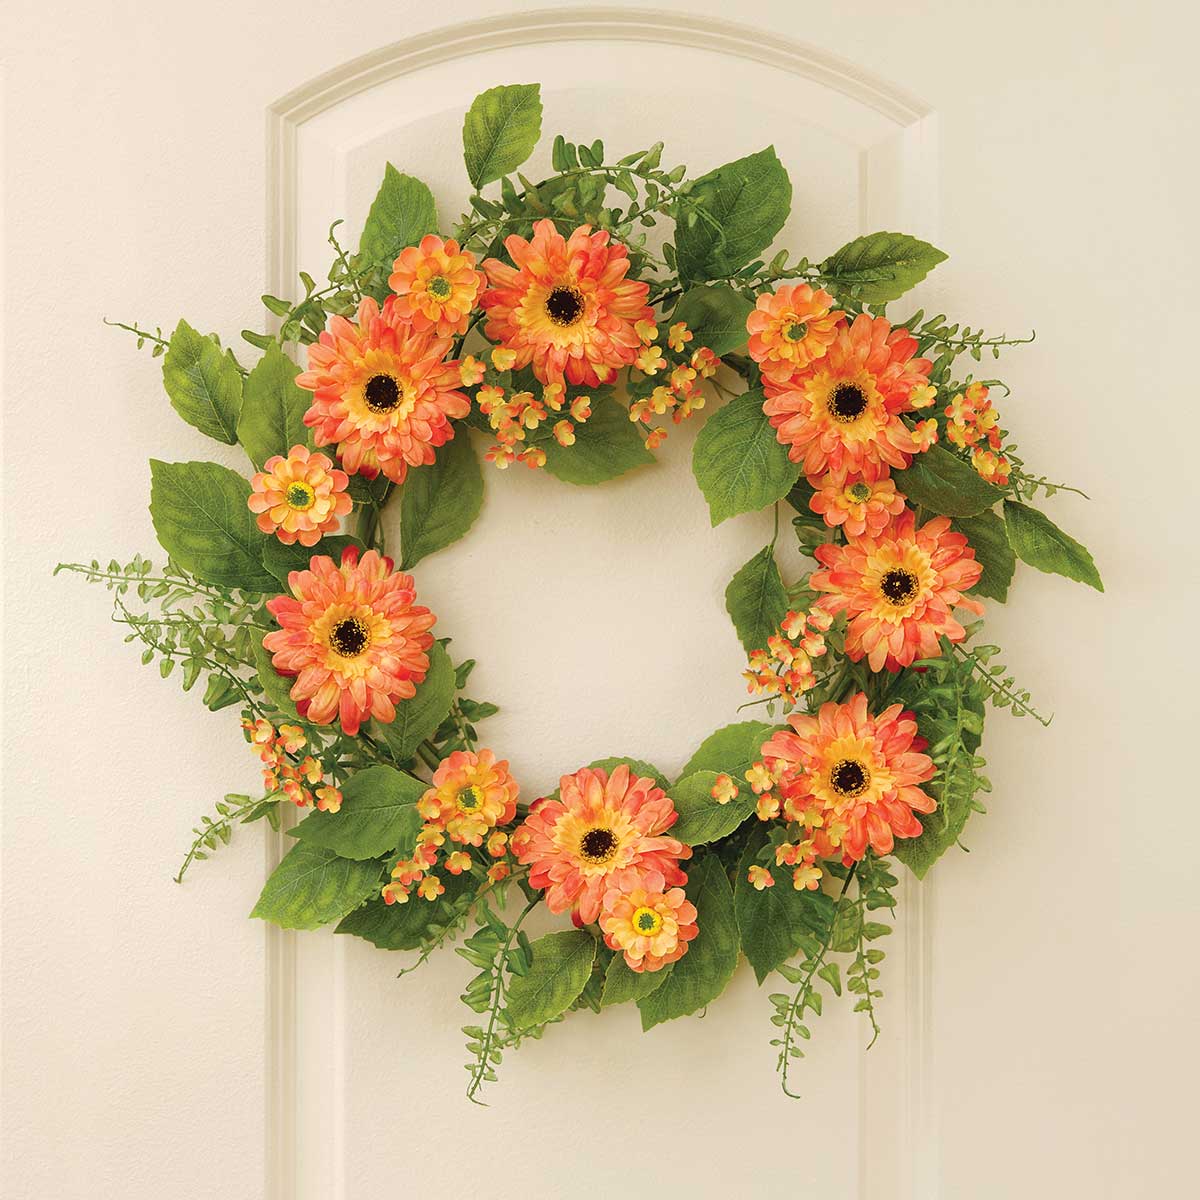 WREATH TANGERINE DAISY 22IN (INNER RING 11IN) - Click Image to Close